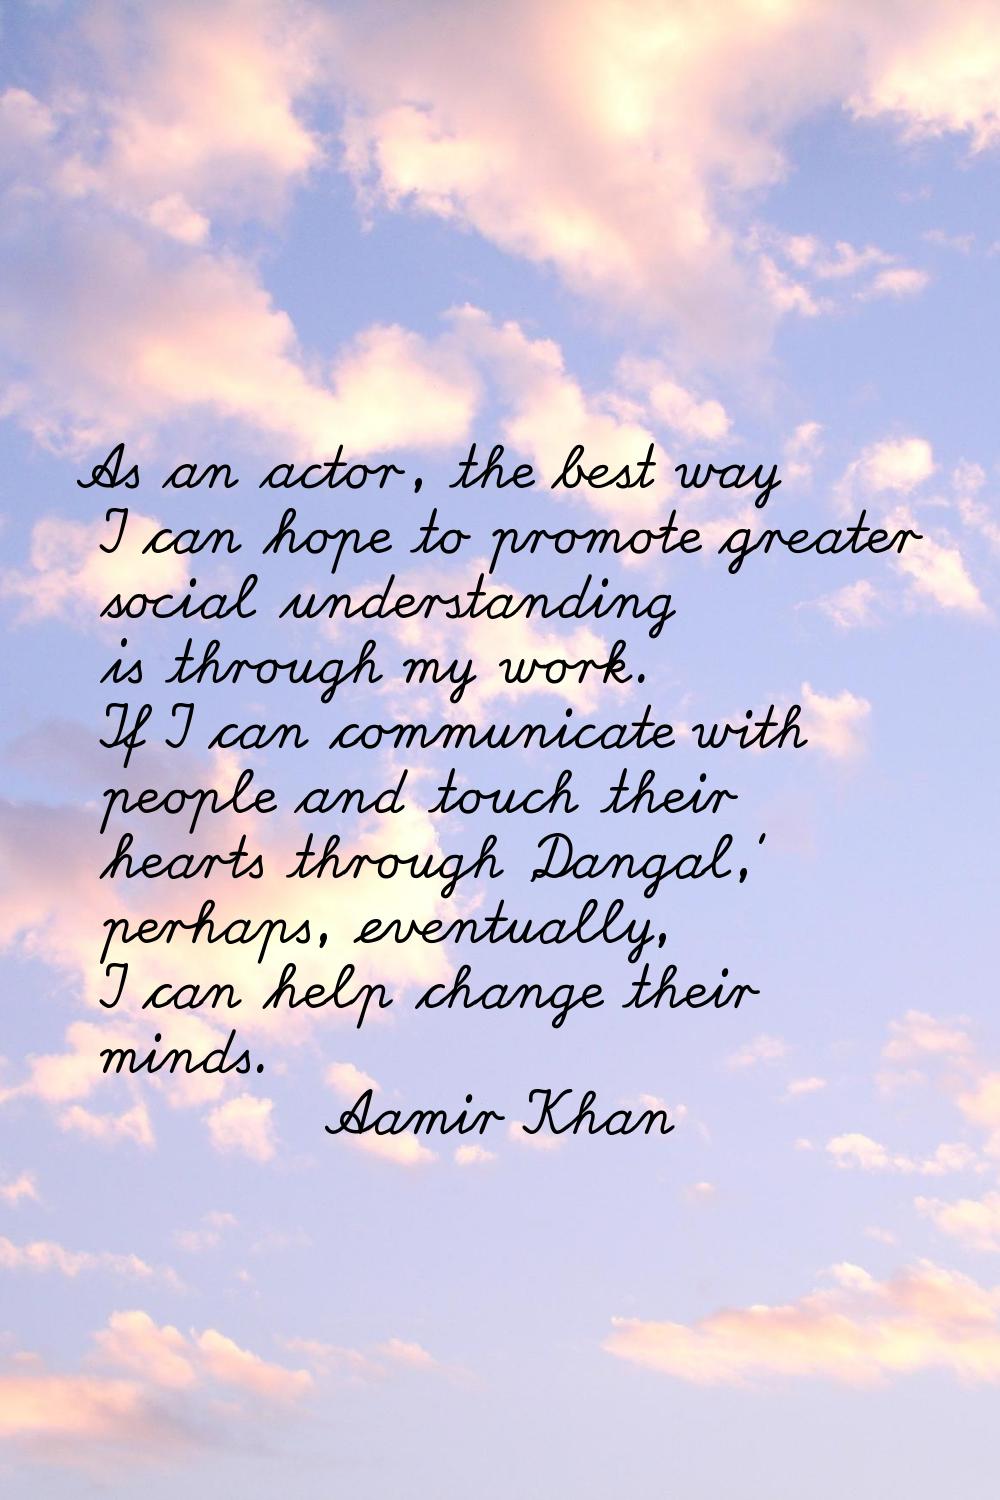 As an actor, the best way I can hope to promote greater social understanding is through my work. If